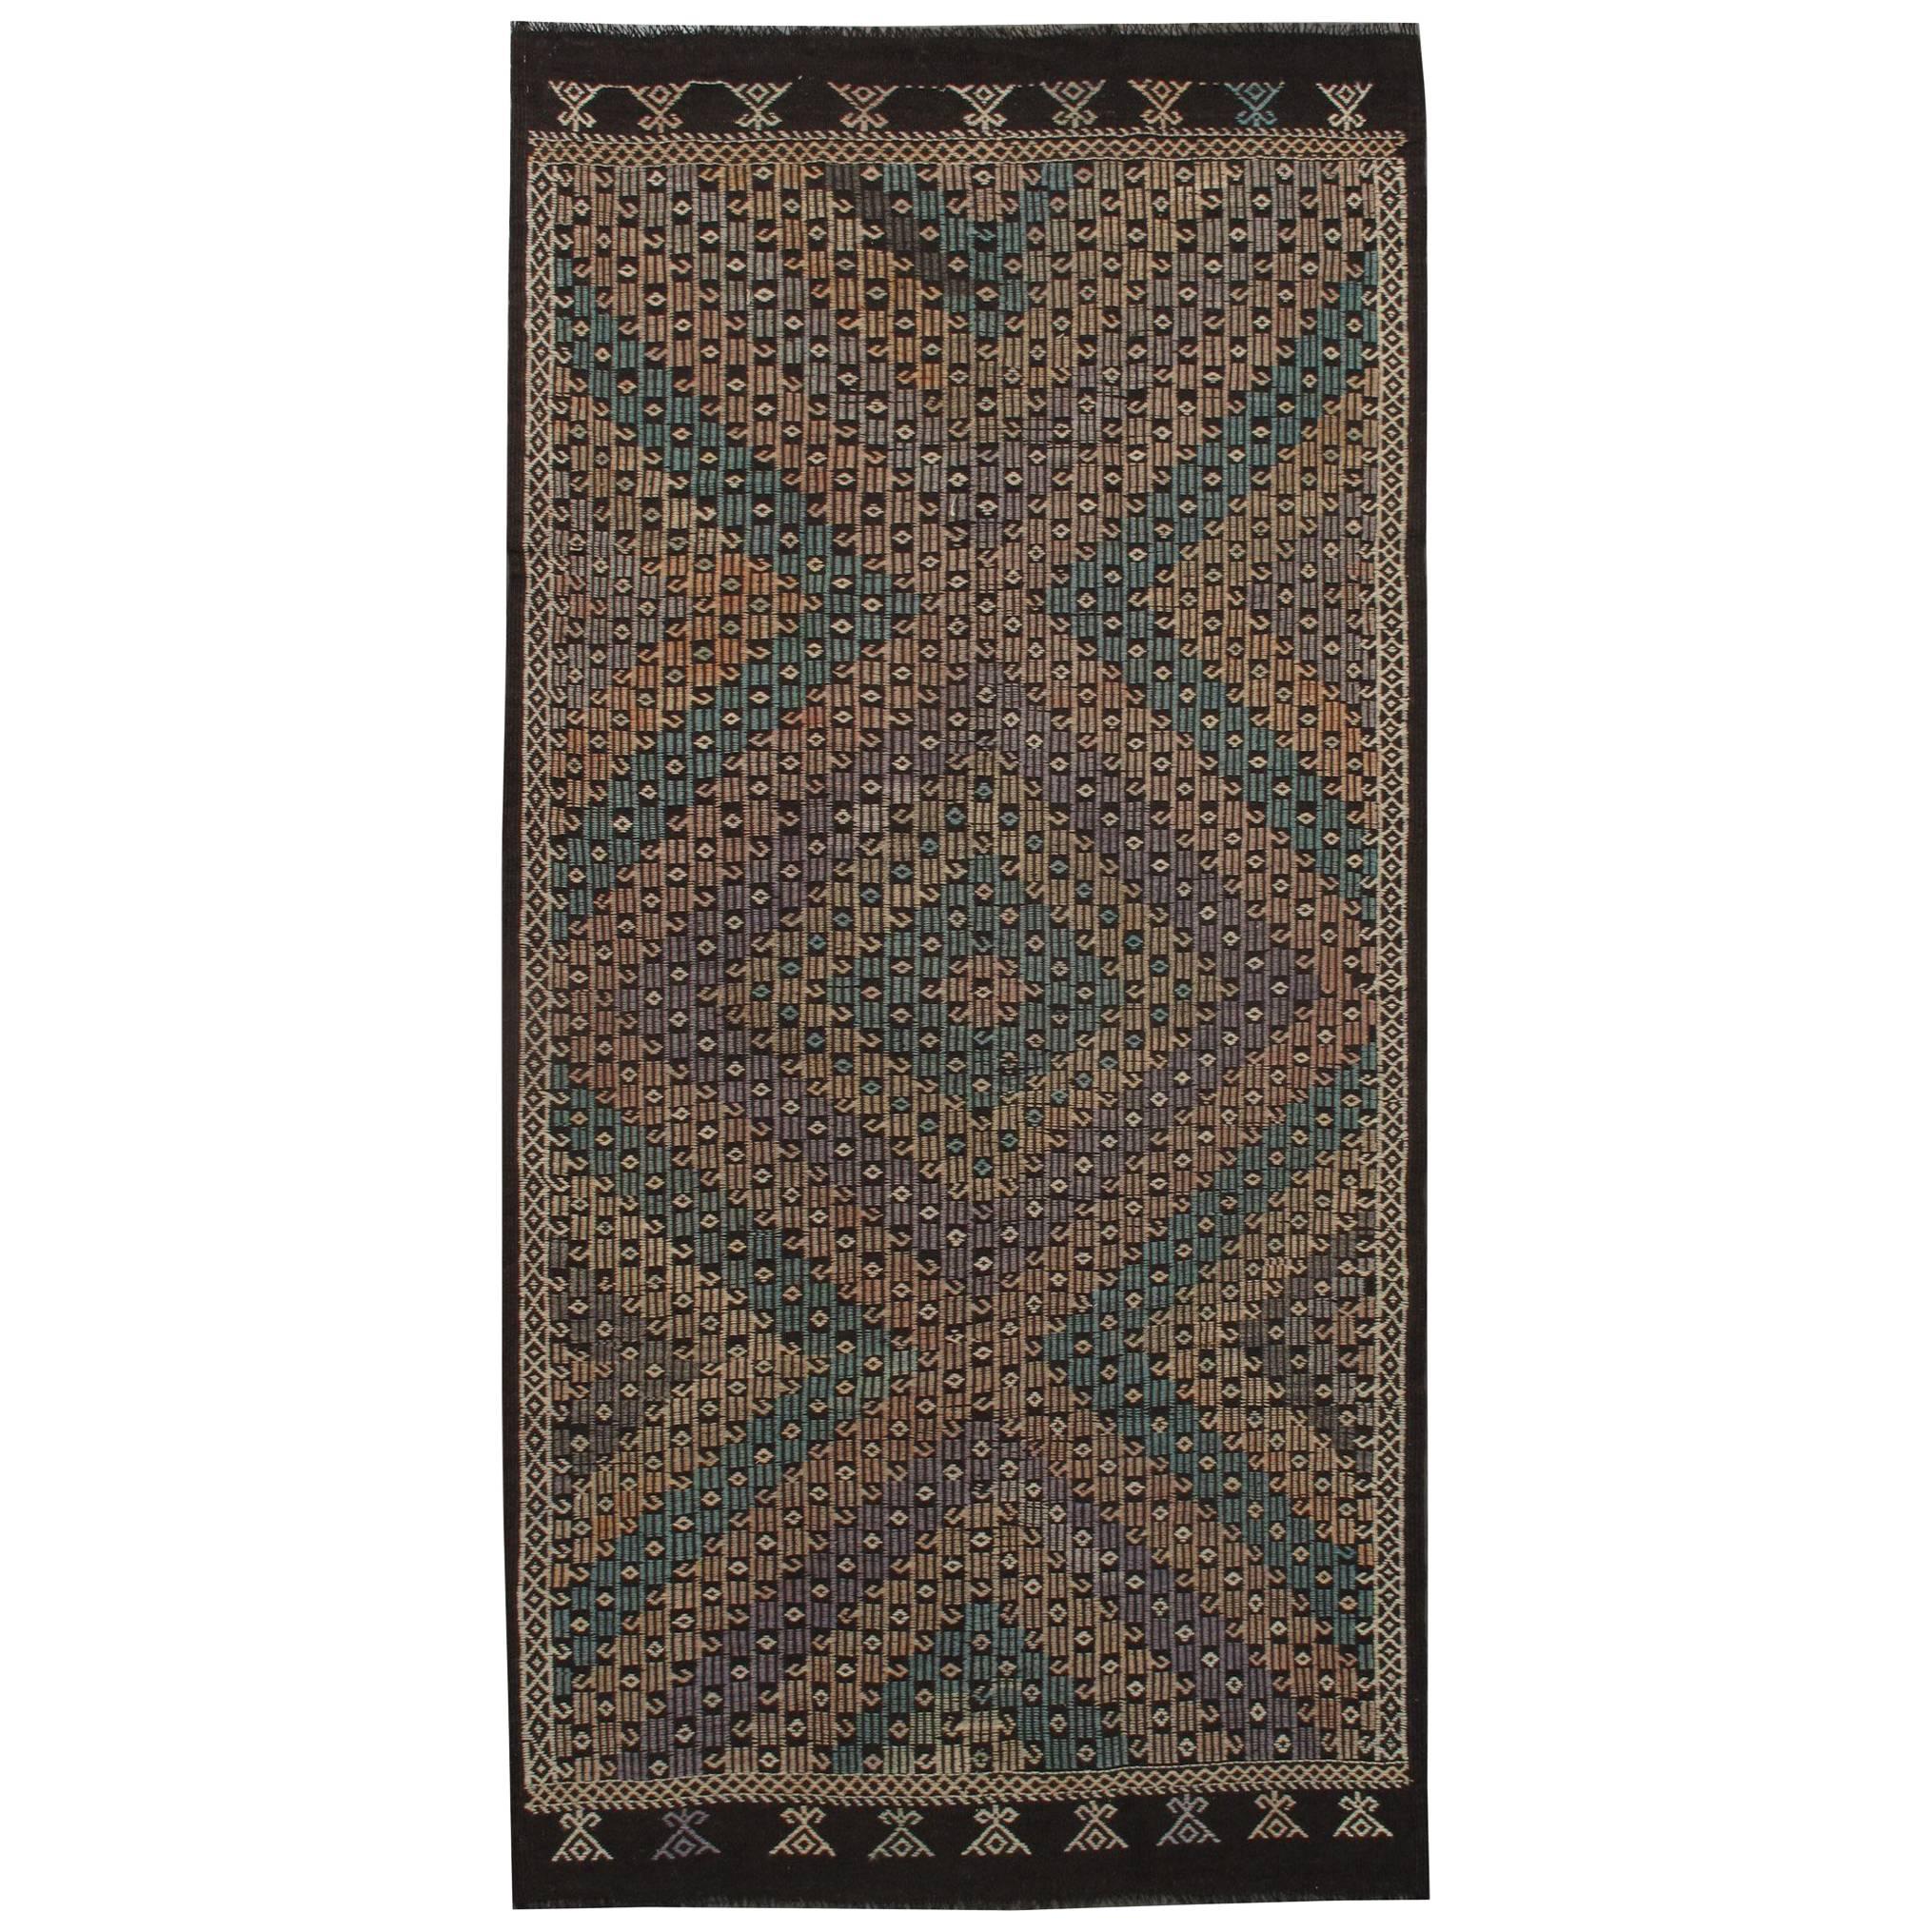 Beautifully Designed Vintage Sumahk Rug For Sale